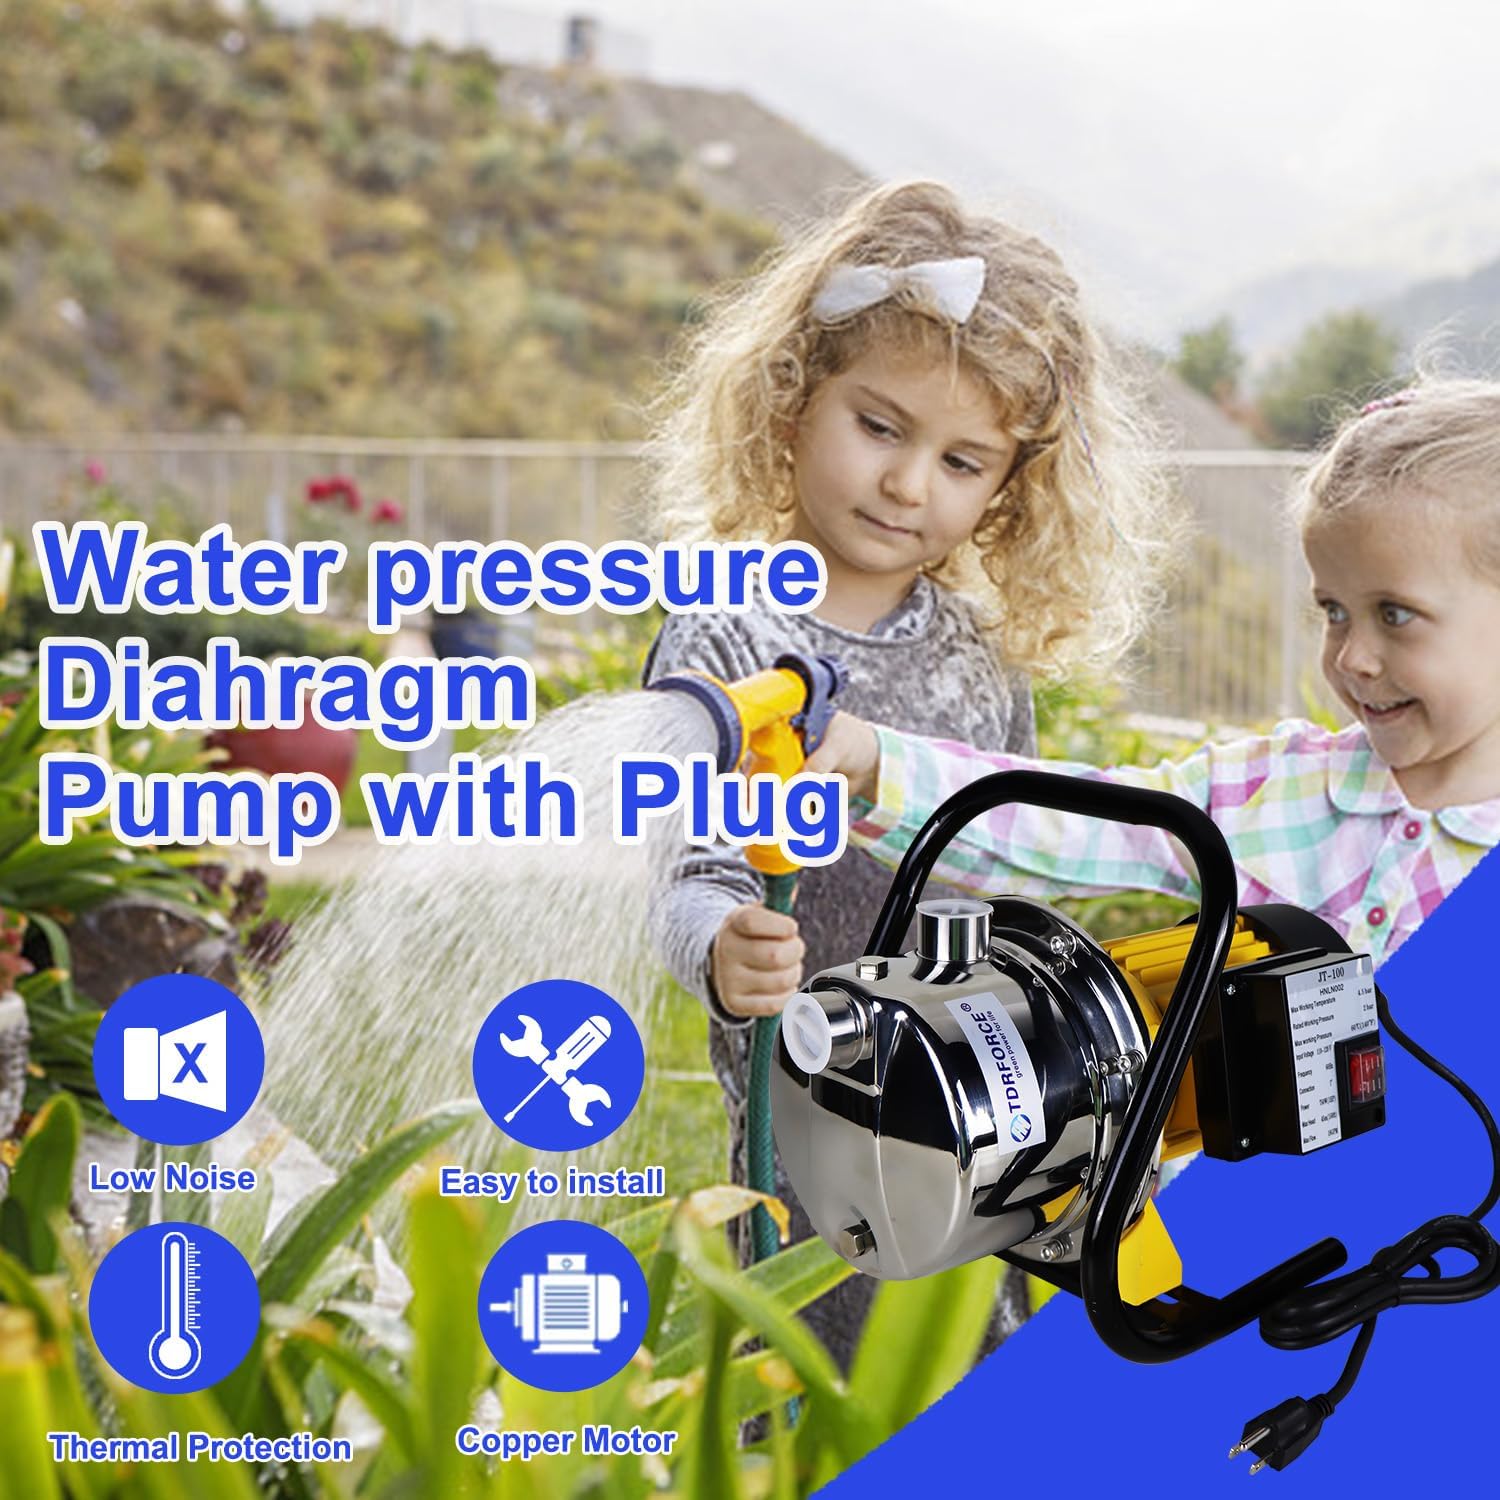 TDRFORCE 1HP 18gpm Shallow Well 110V Booster Pump Portable Garden Pond Water Transfer Pump Electric Yard Pool Cover Draining Pump Above Ground Self Priming Irrigation Pump Stainless Steel Lake Pump